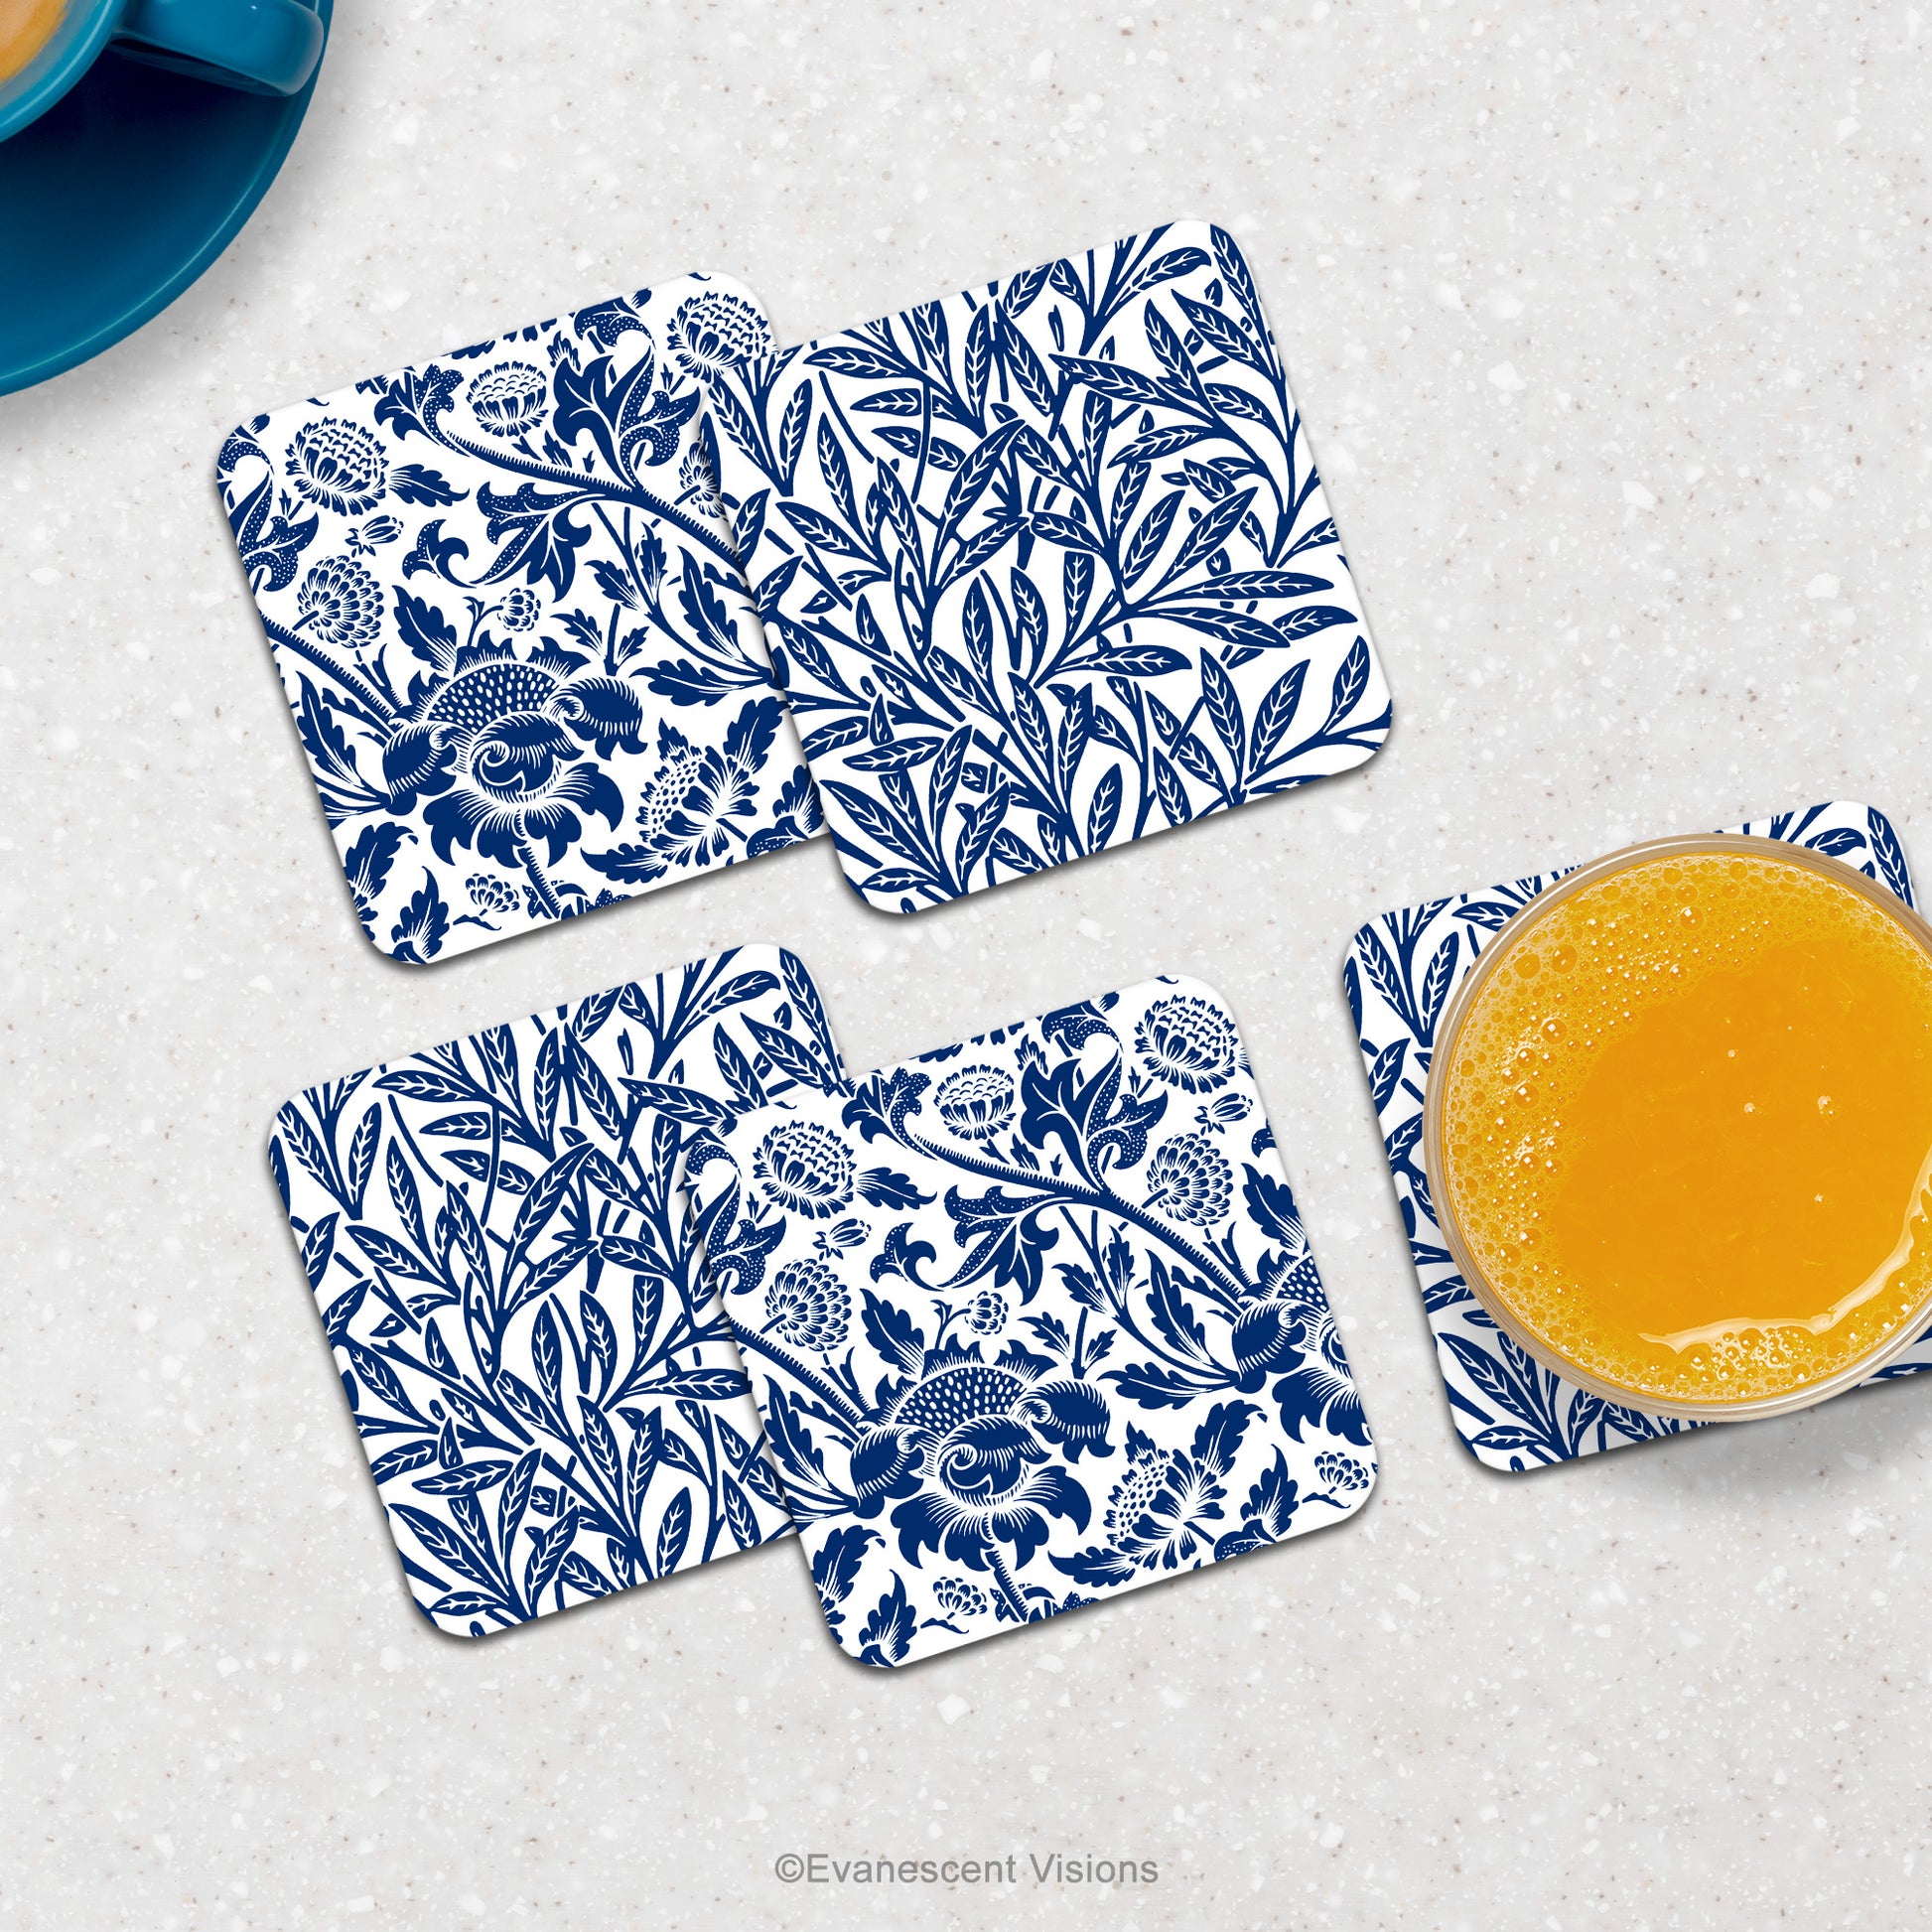 Blue and white floral patterned coasters on countertop with drinks.